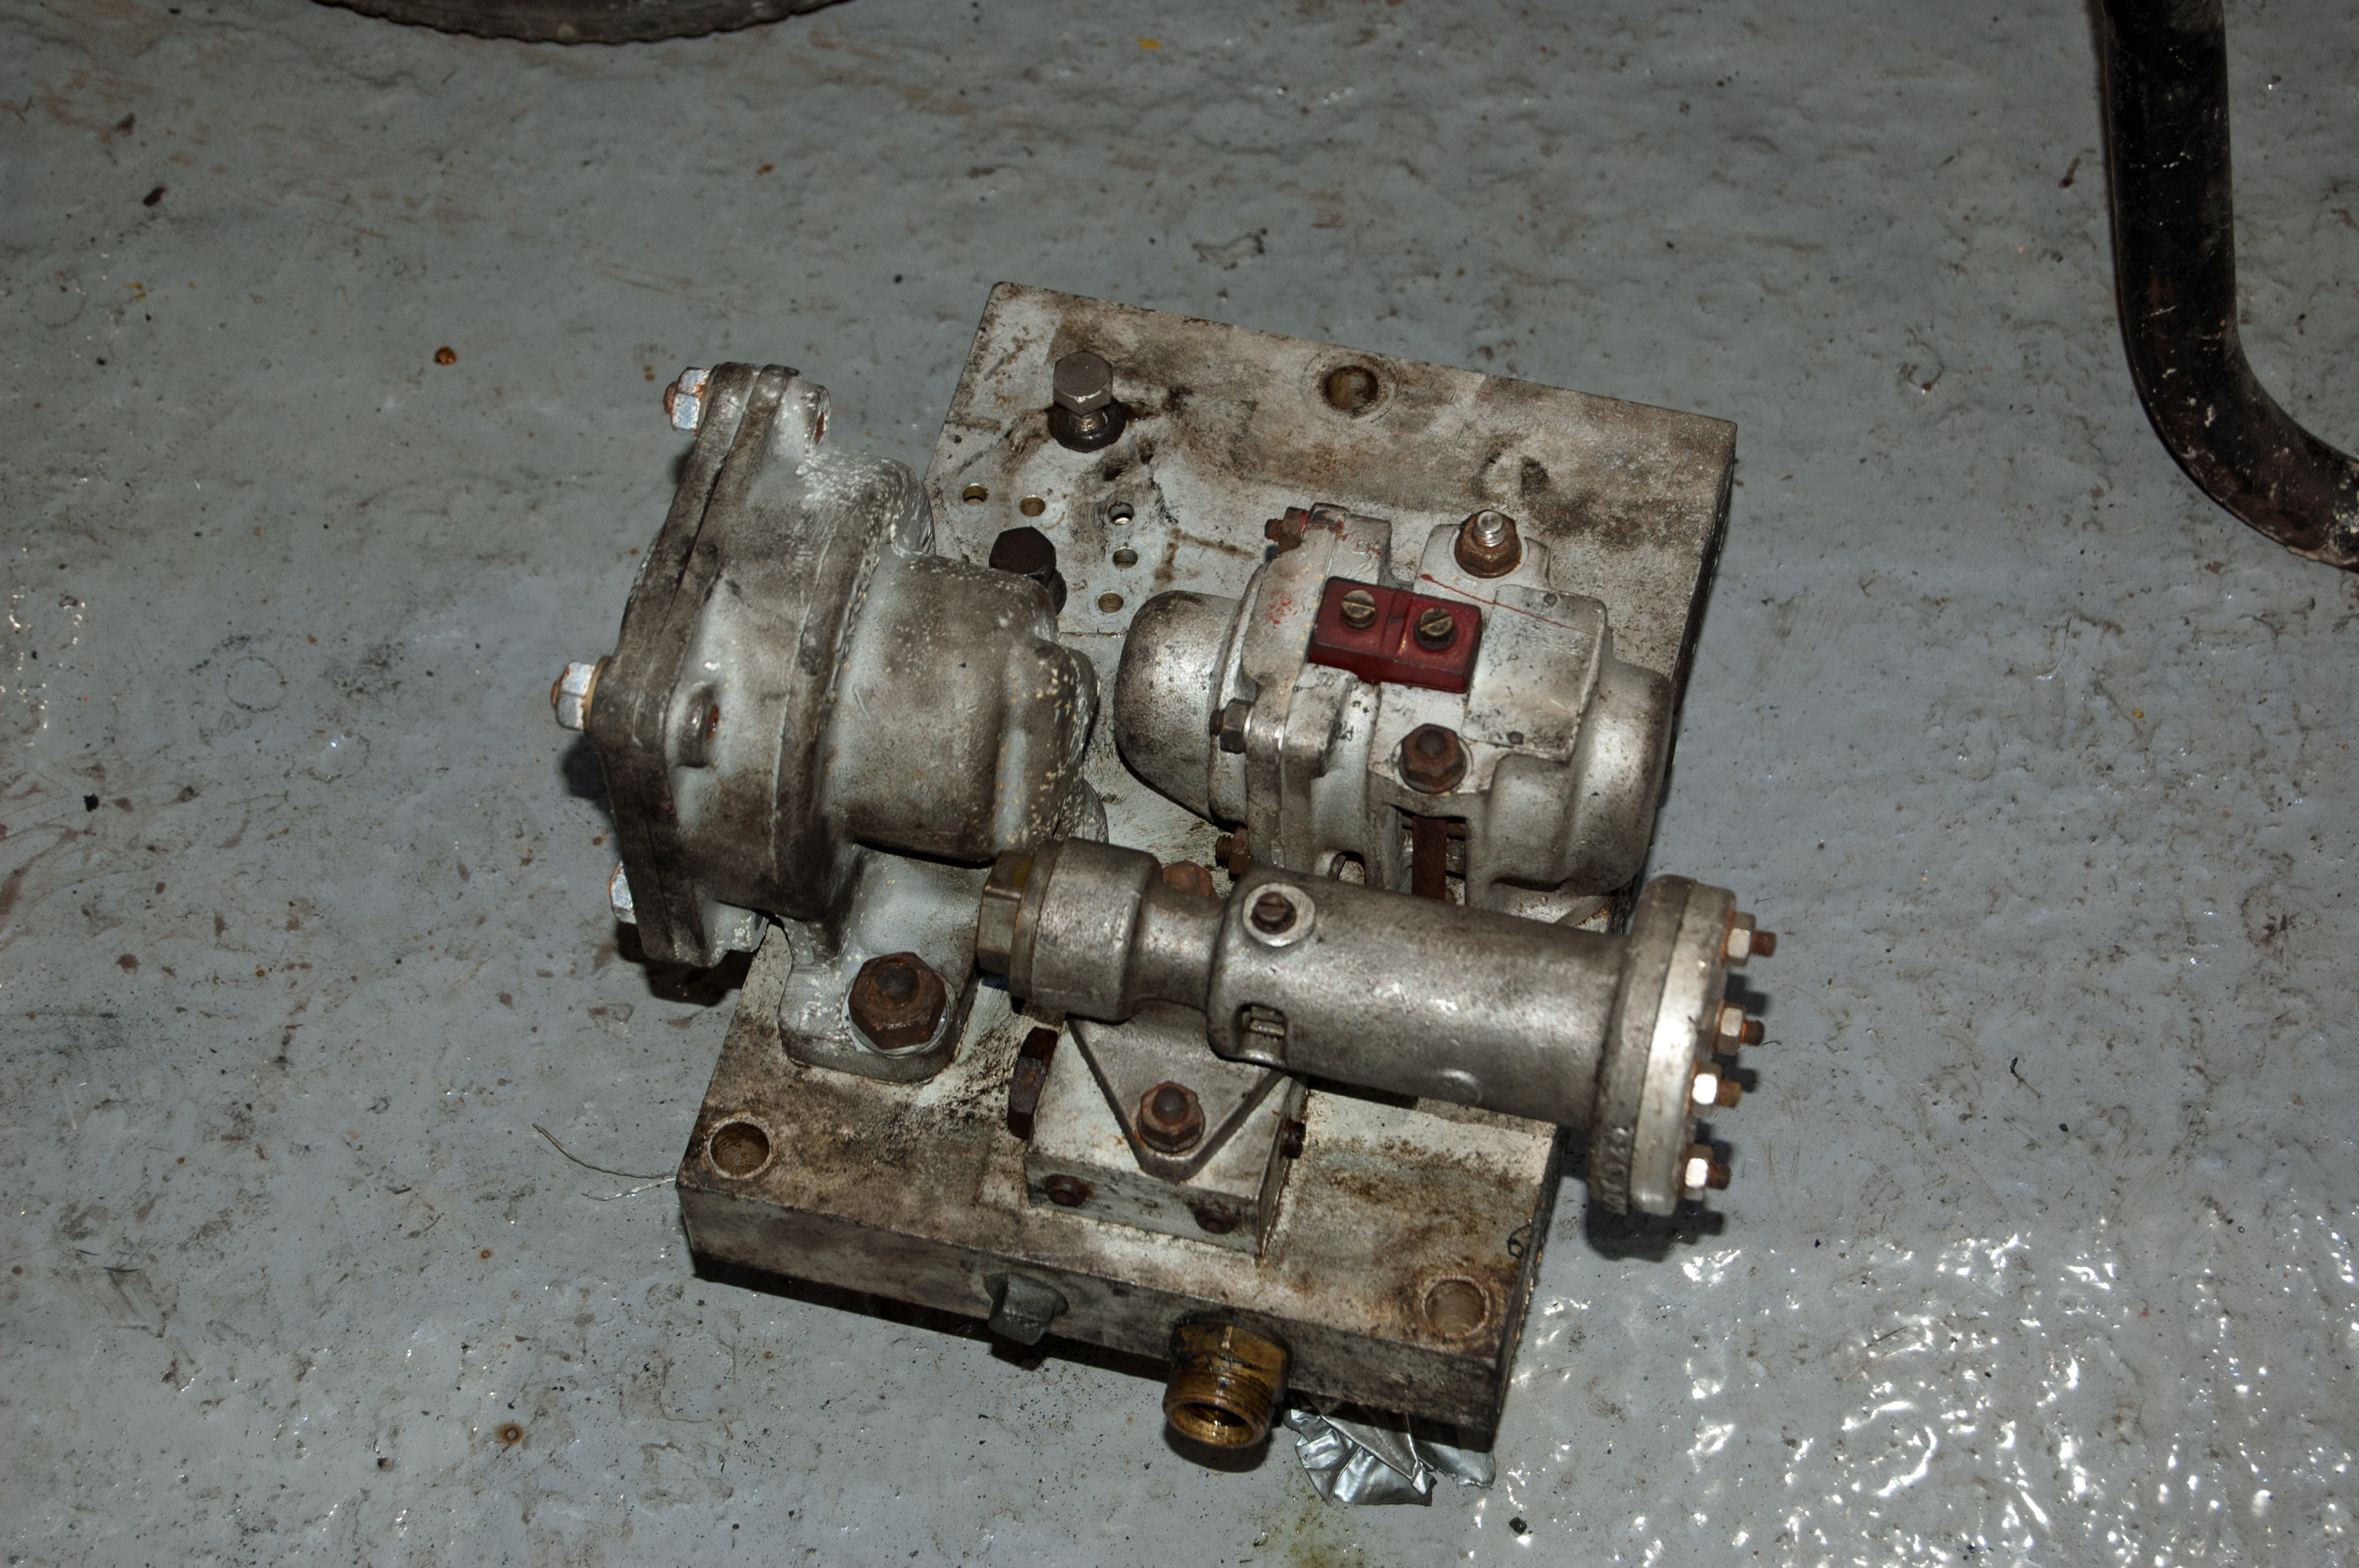 Some of the air braking valves, from the box under the cab floor, have been removed